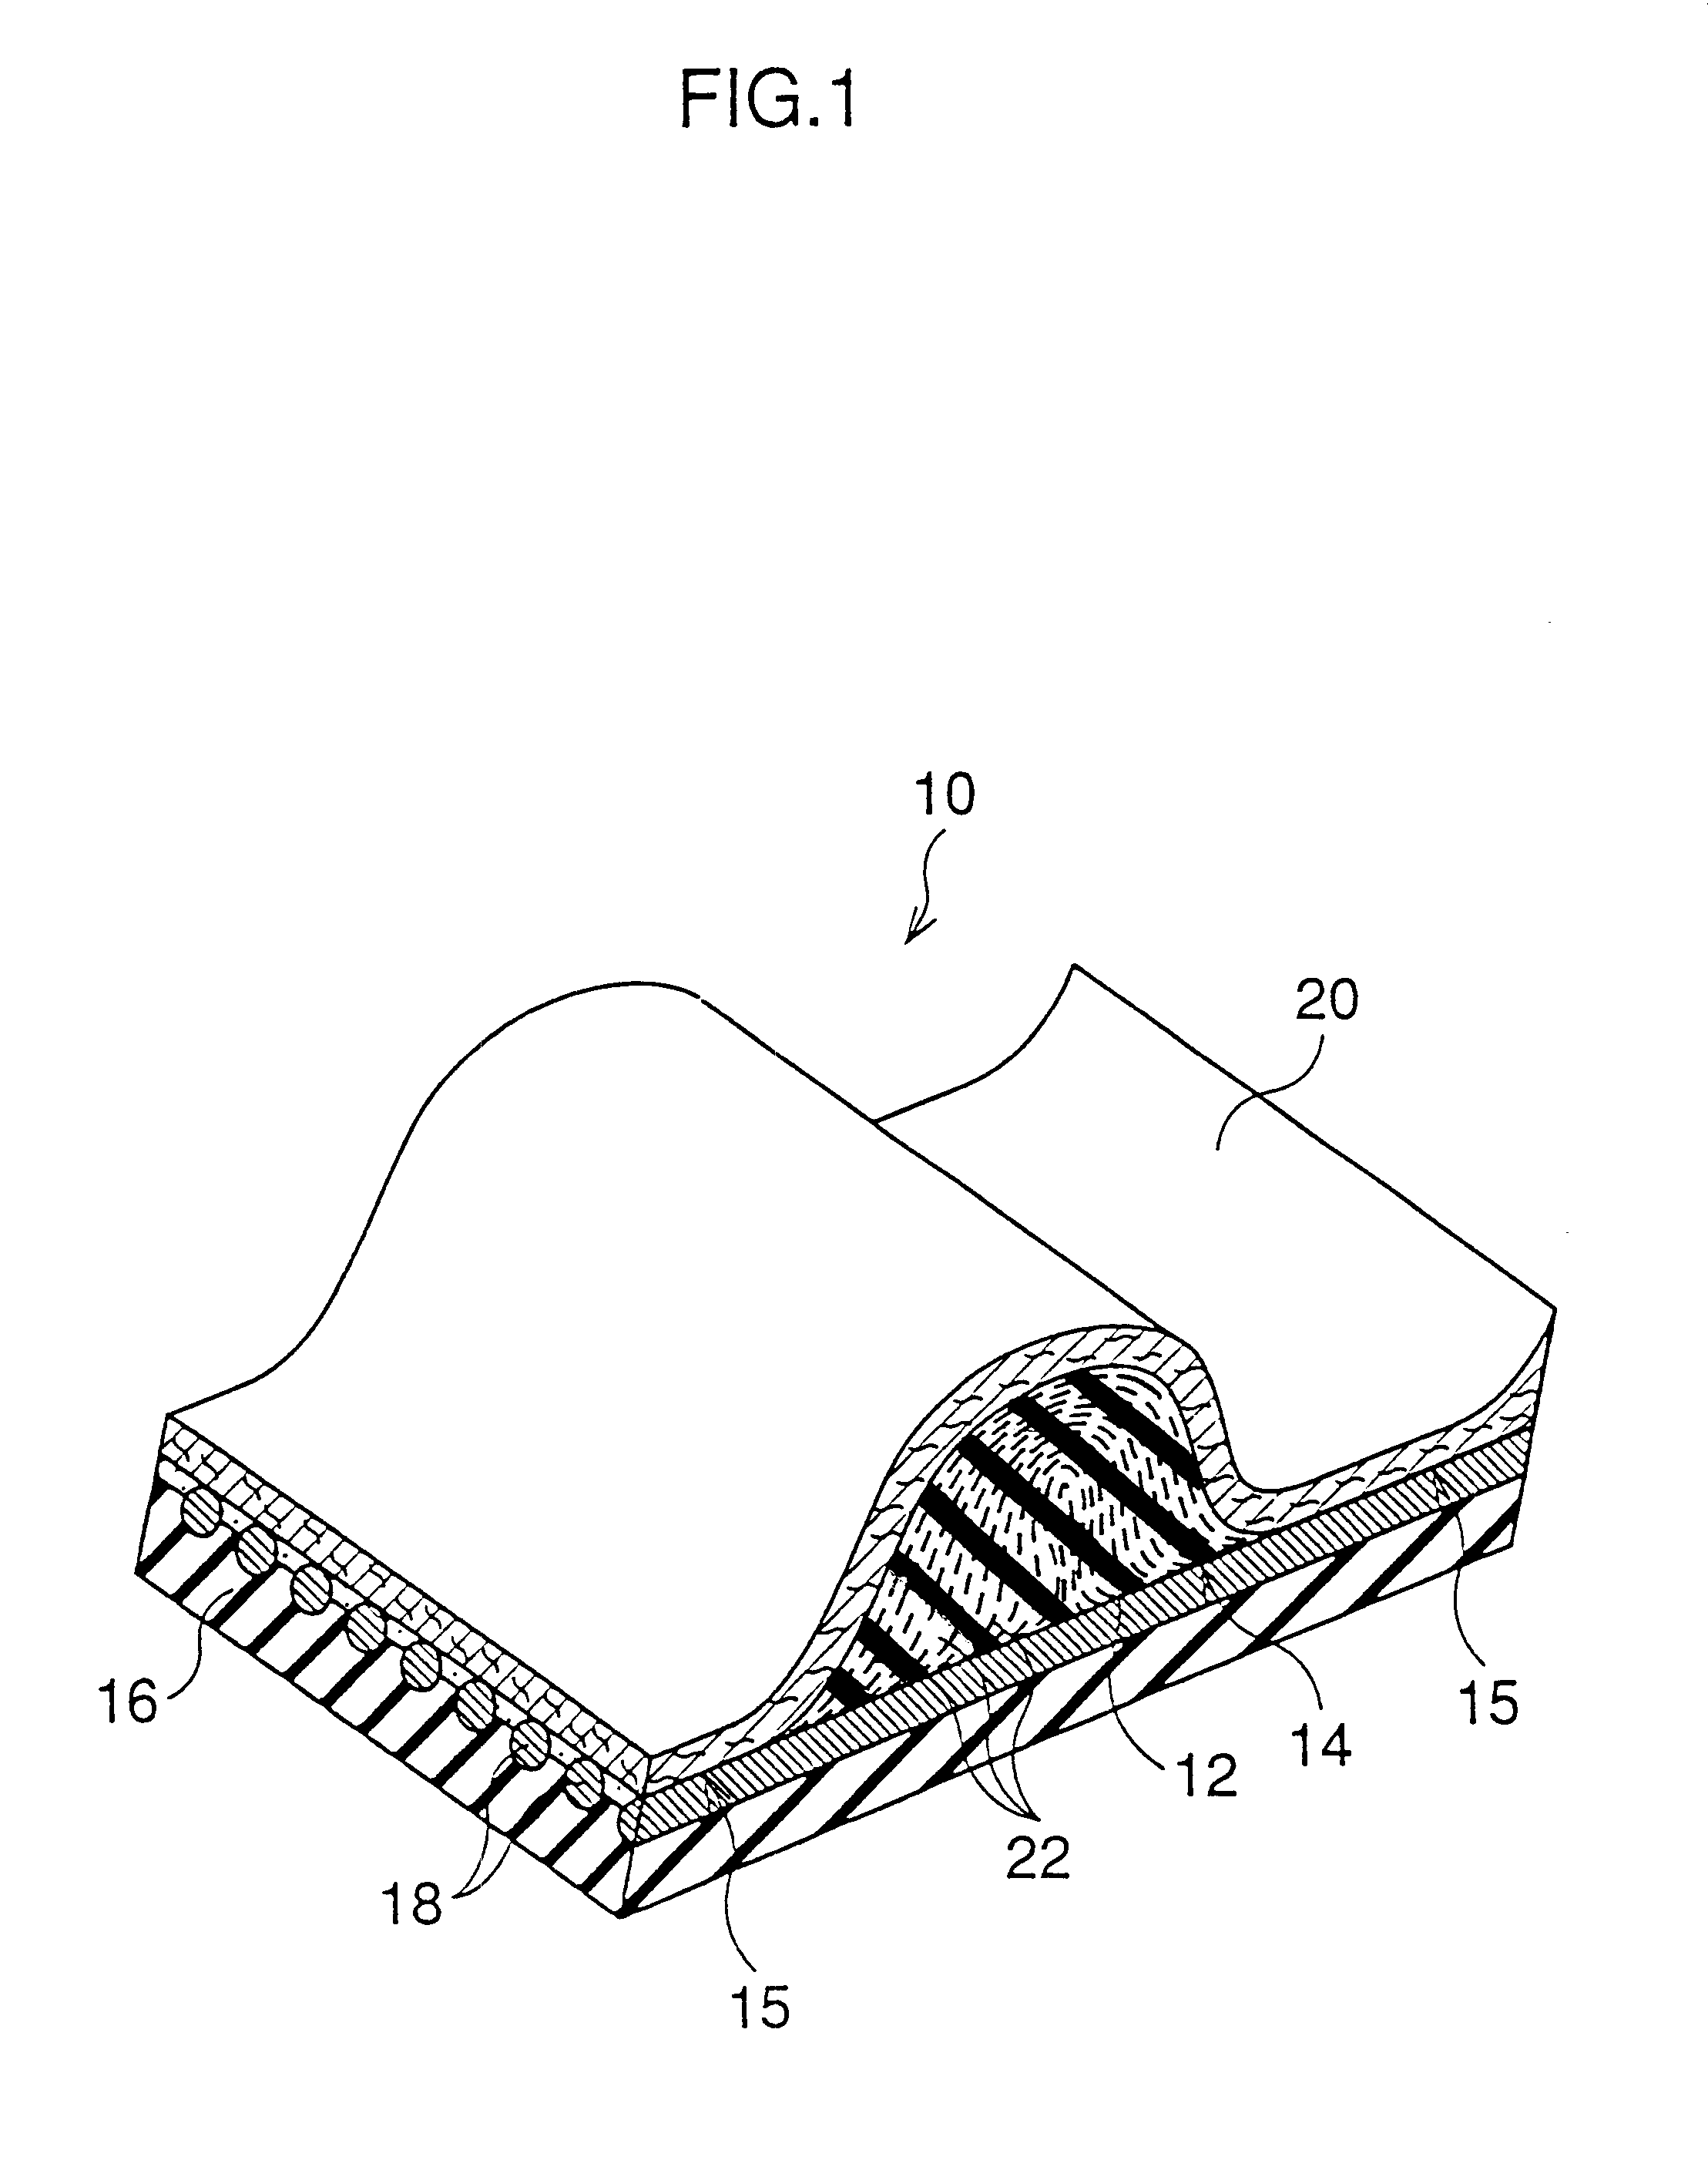 Toothed belt including short fibers distributed therein